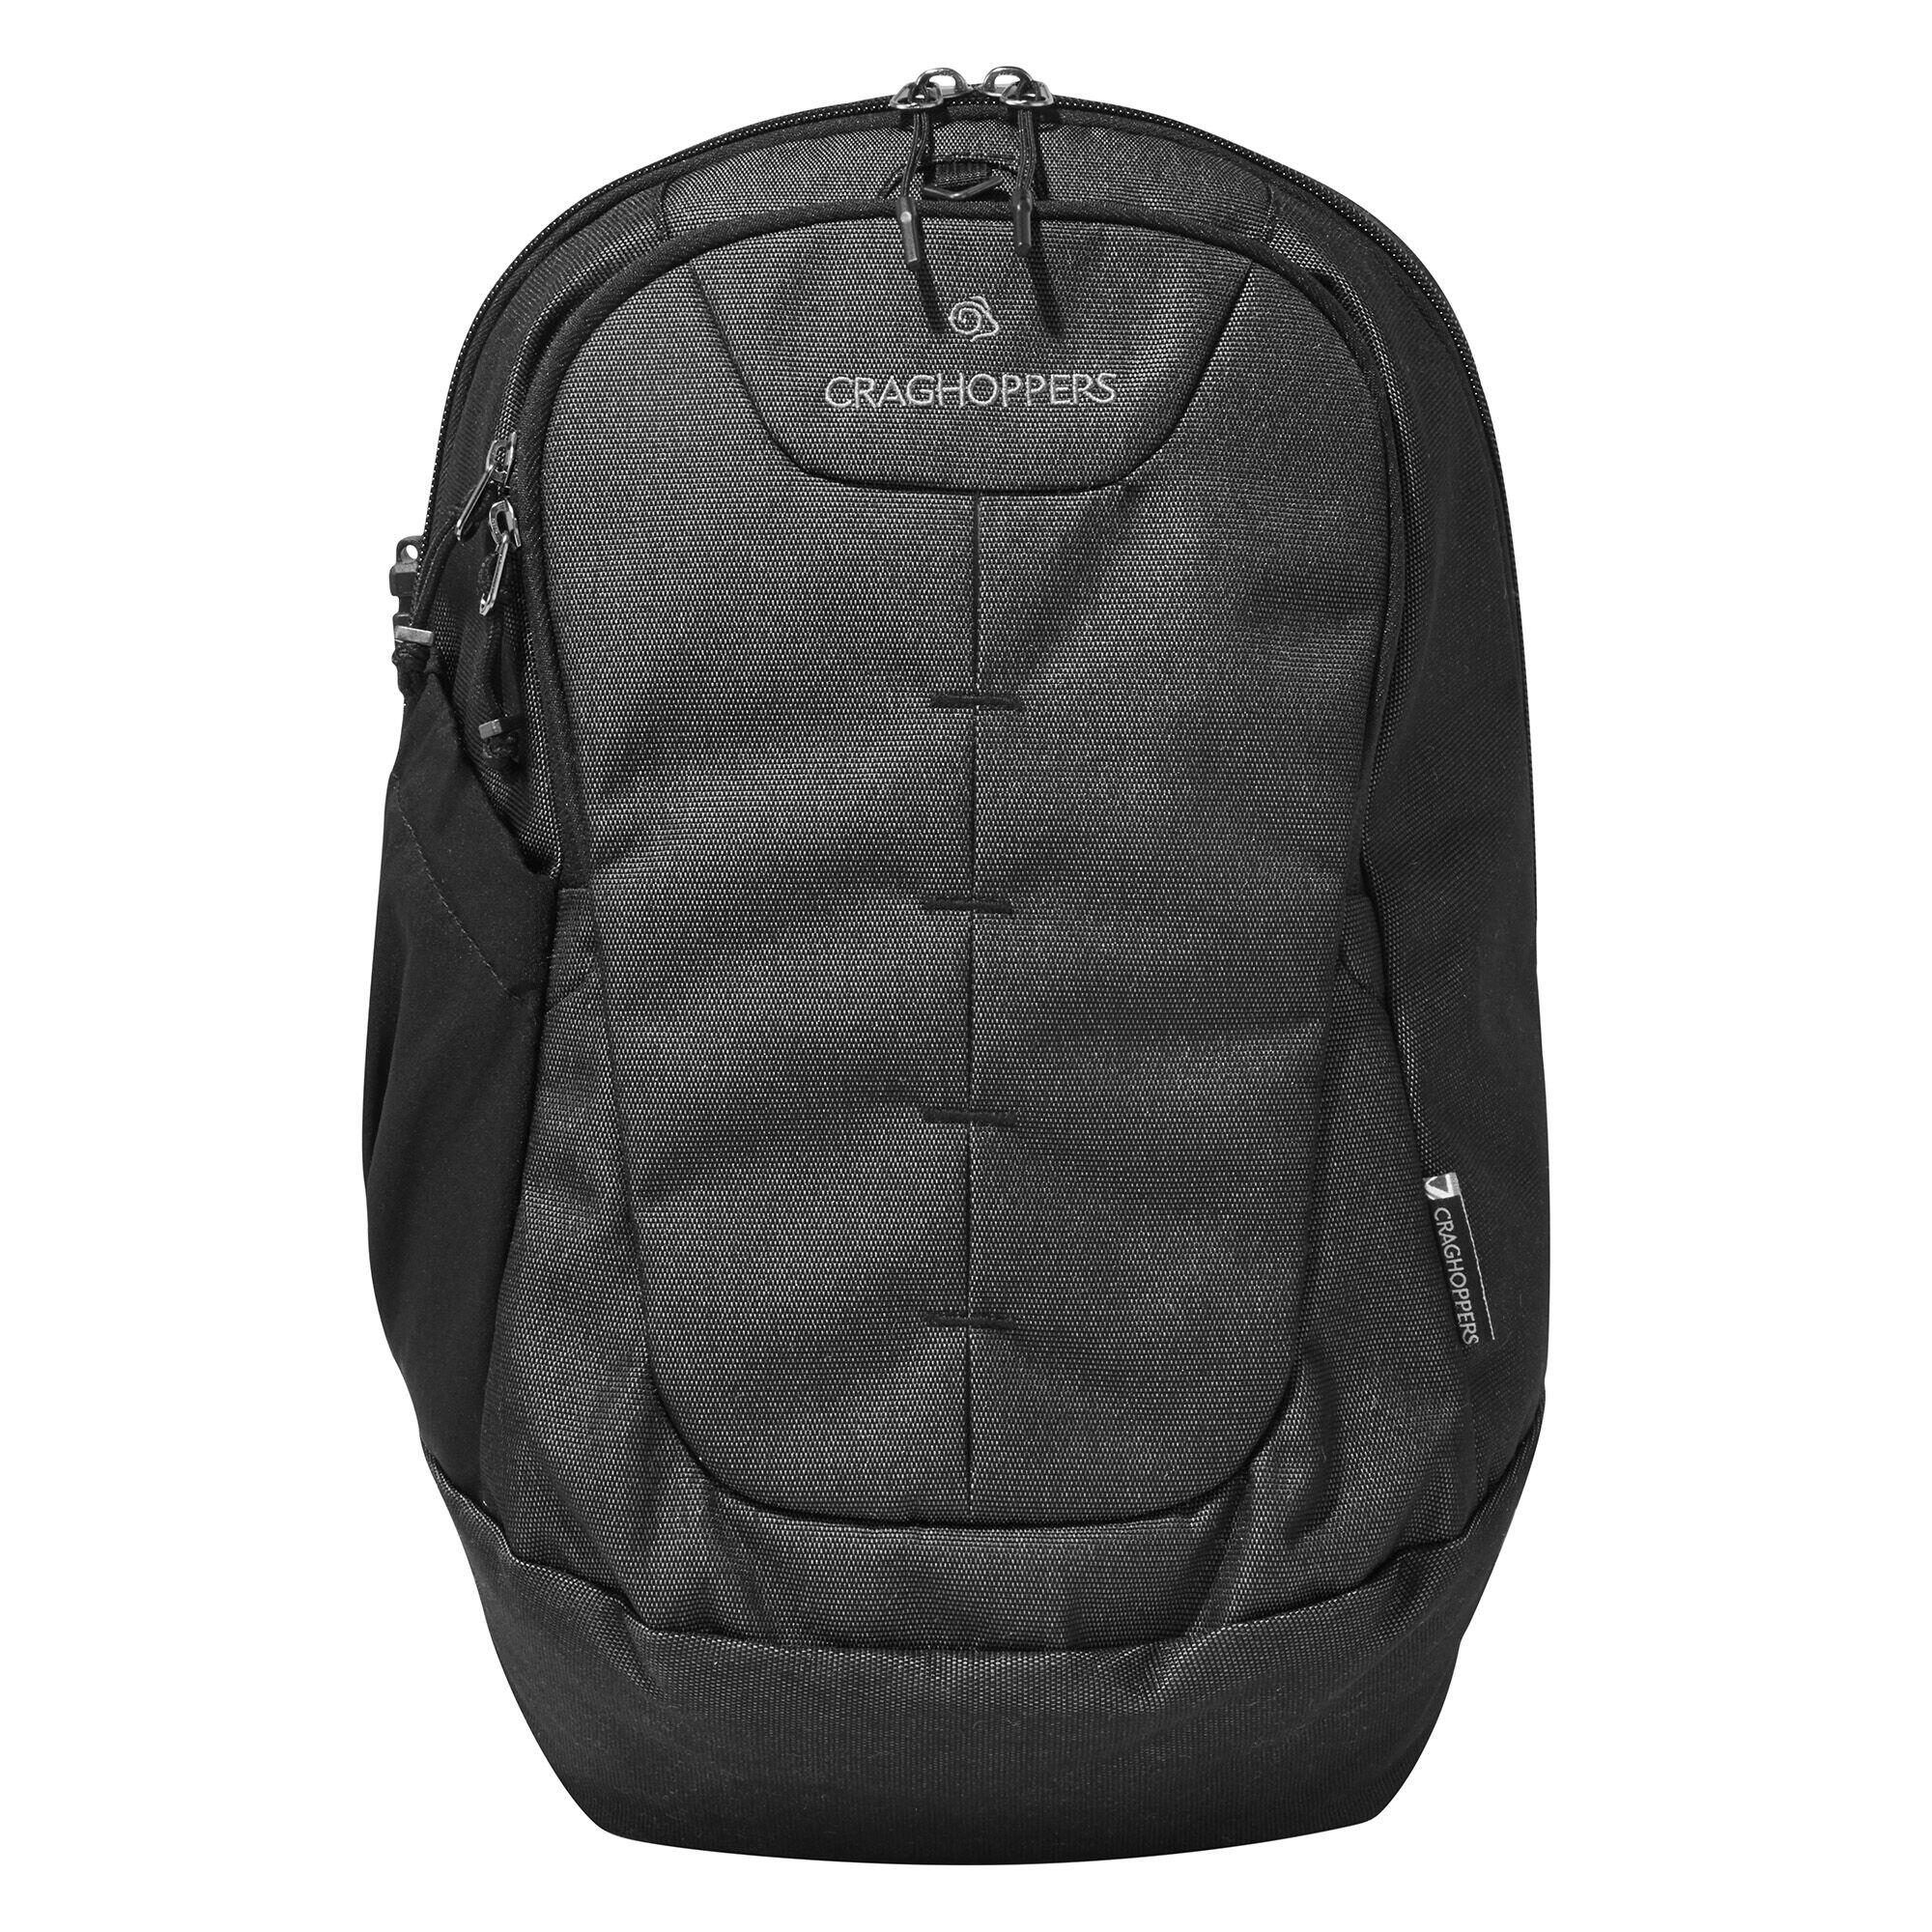 CRAGHOPPERS 18L Anti-Theft Backpack